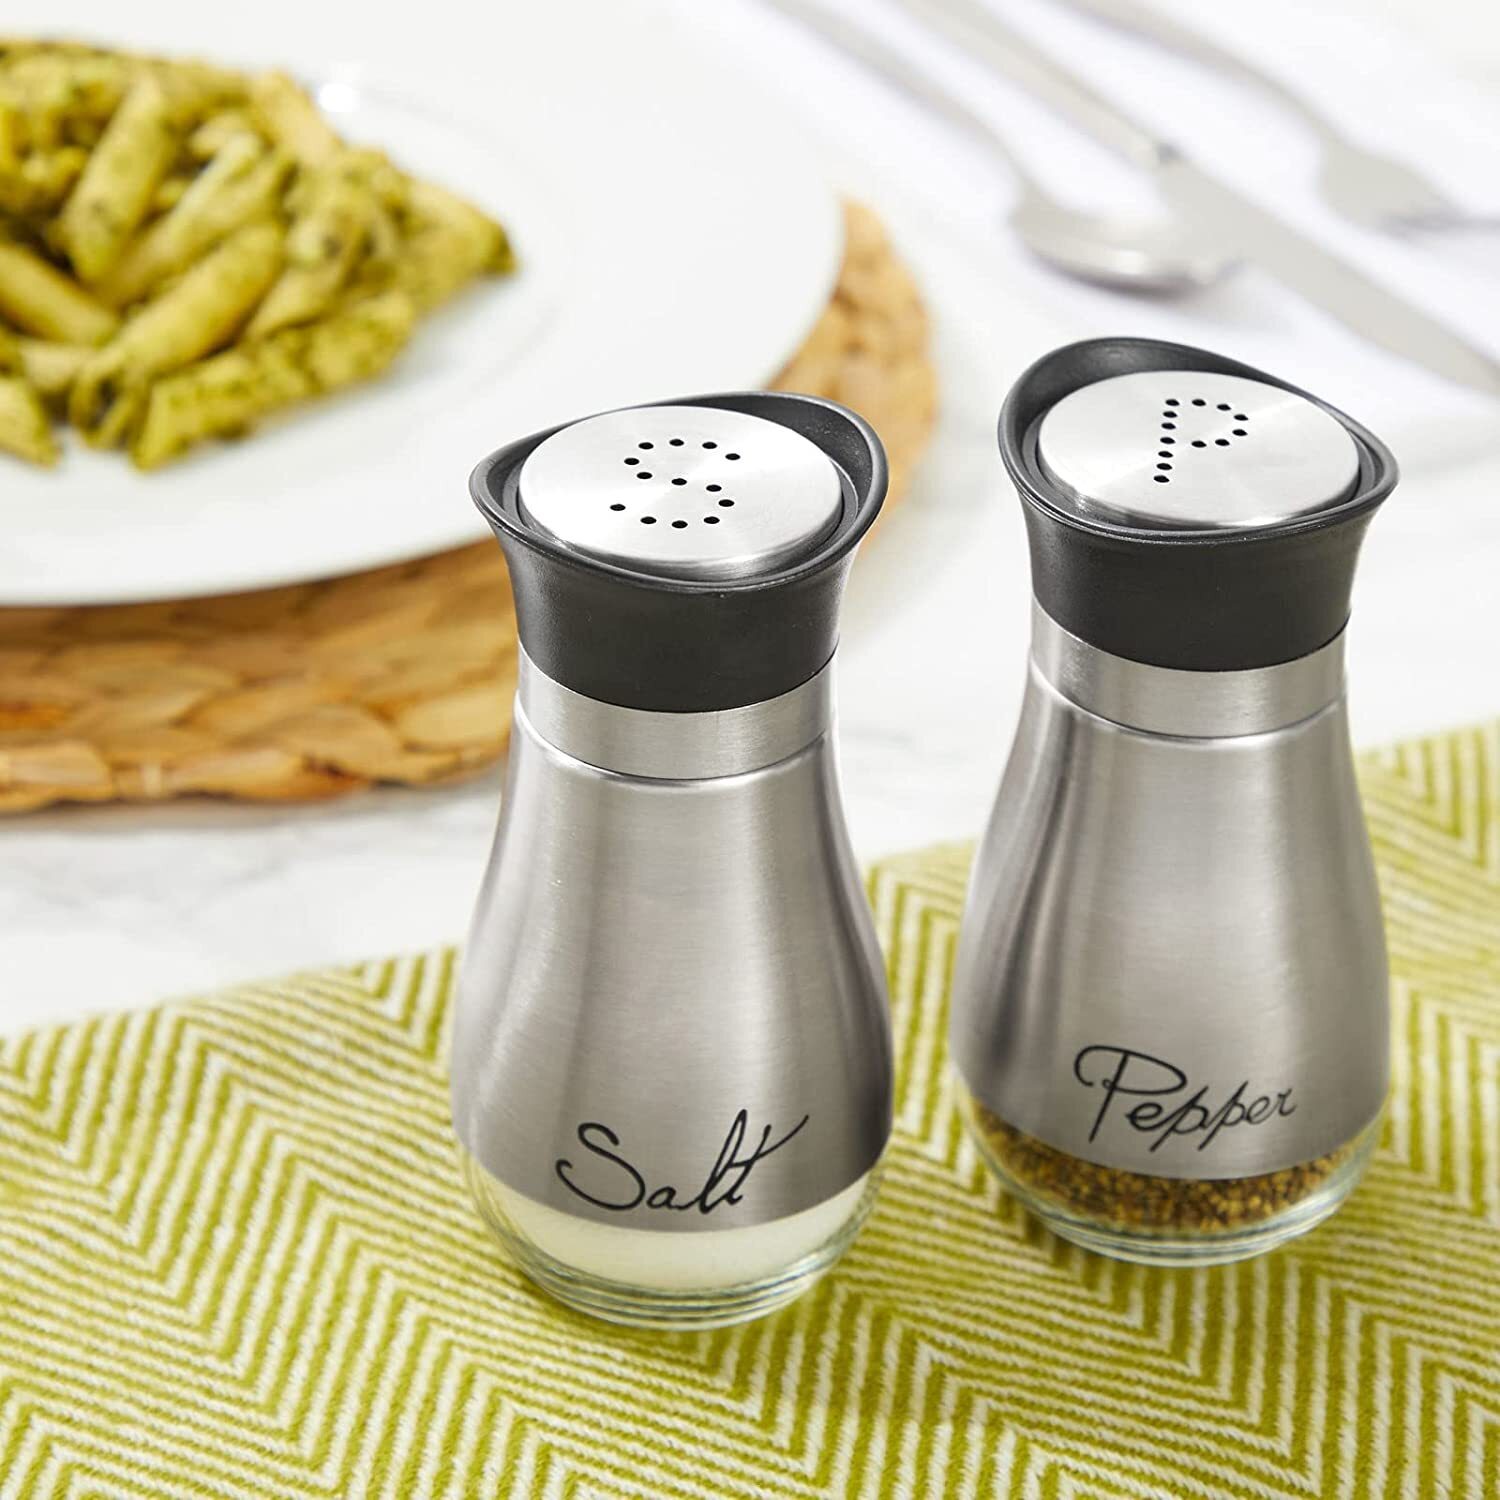 Stainless Steel Salt and Pepper Shakers